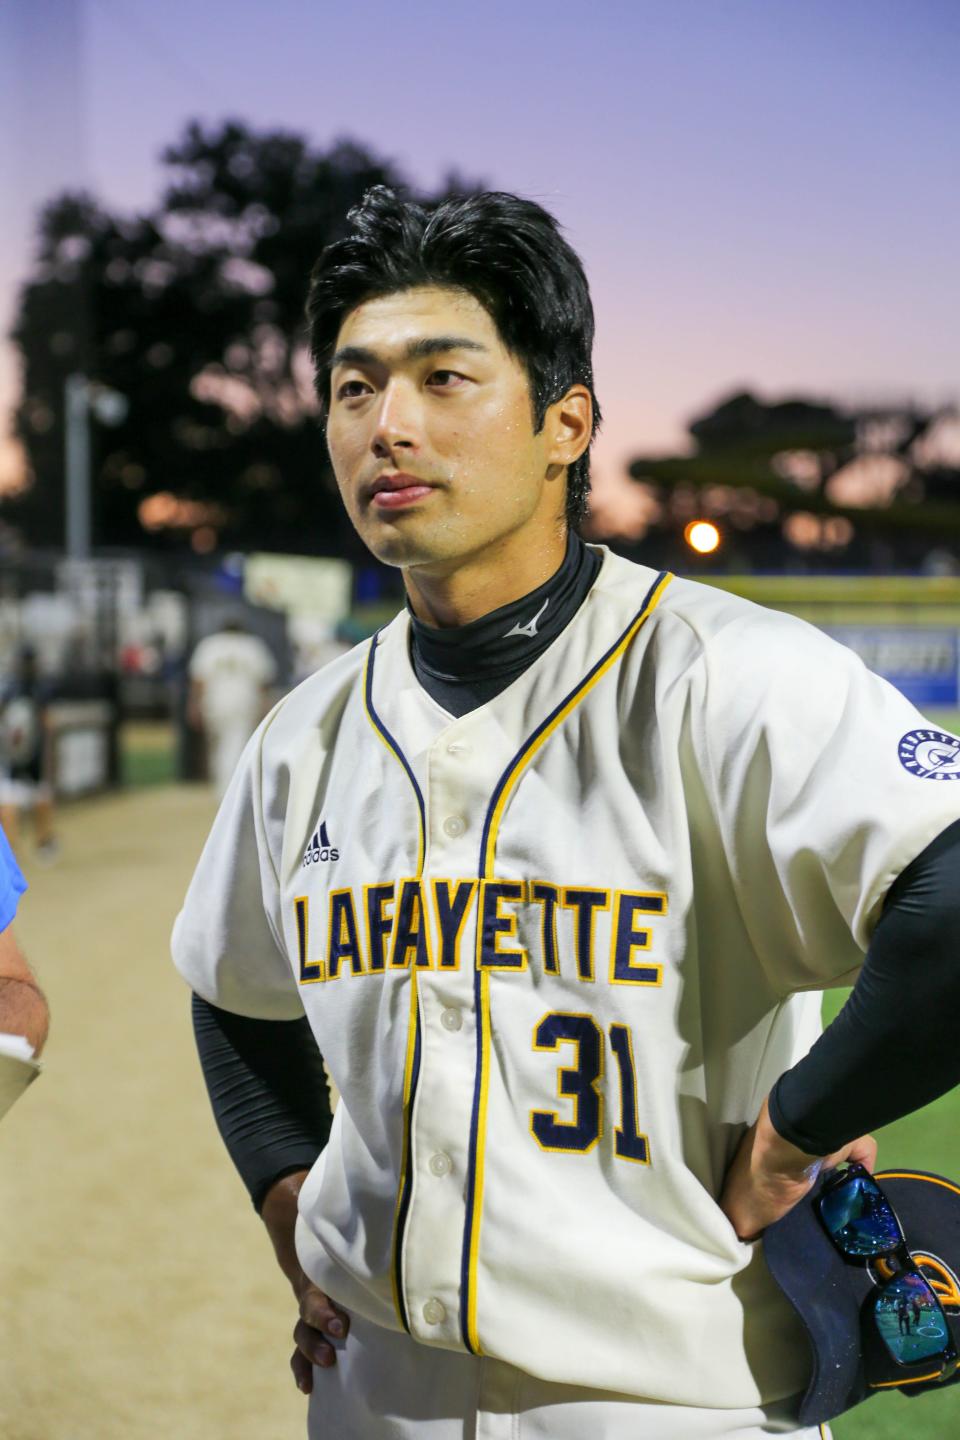 Aviator pitcher Gyeongju Kim (31) answers interview questions after he was deemed the MVP player of the game in the Champion City Kings at Lafayette Aviators baseball game, Thursday, June 23, 2022, in Lafayette.